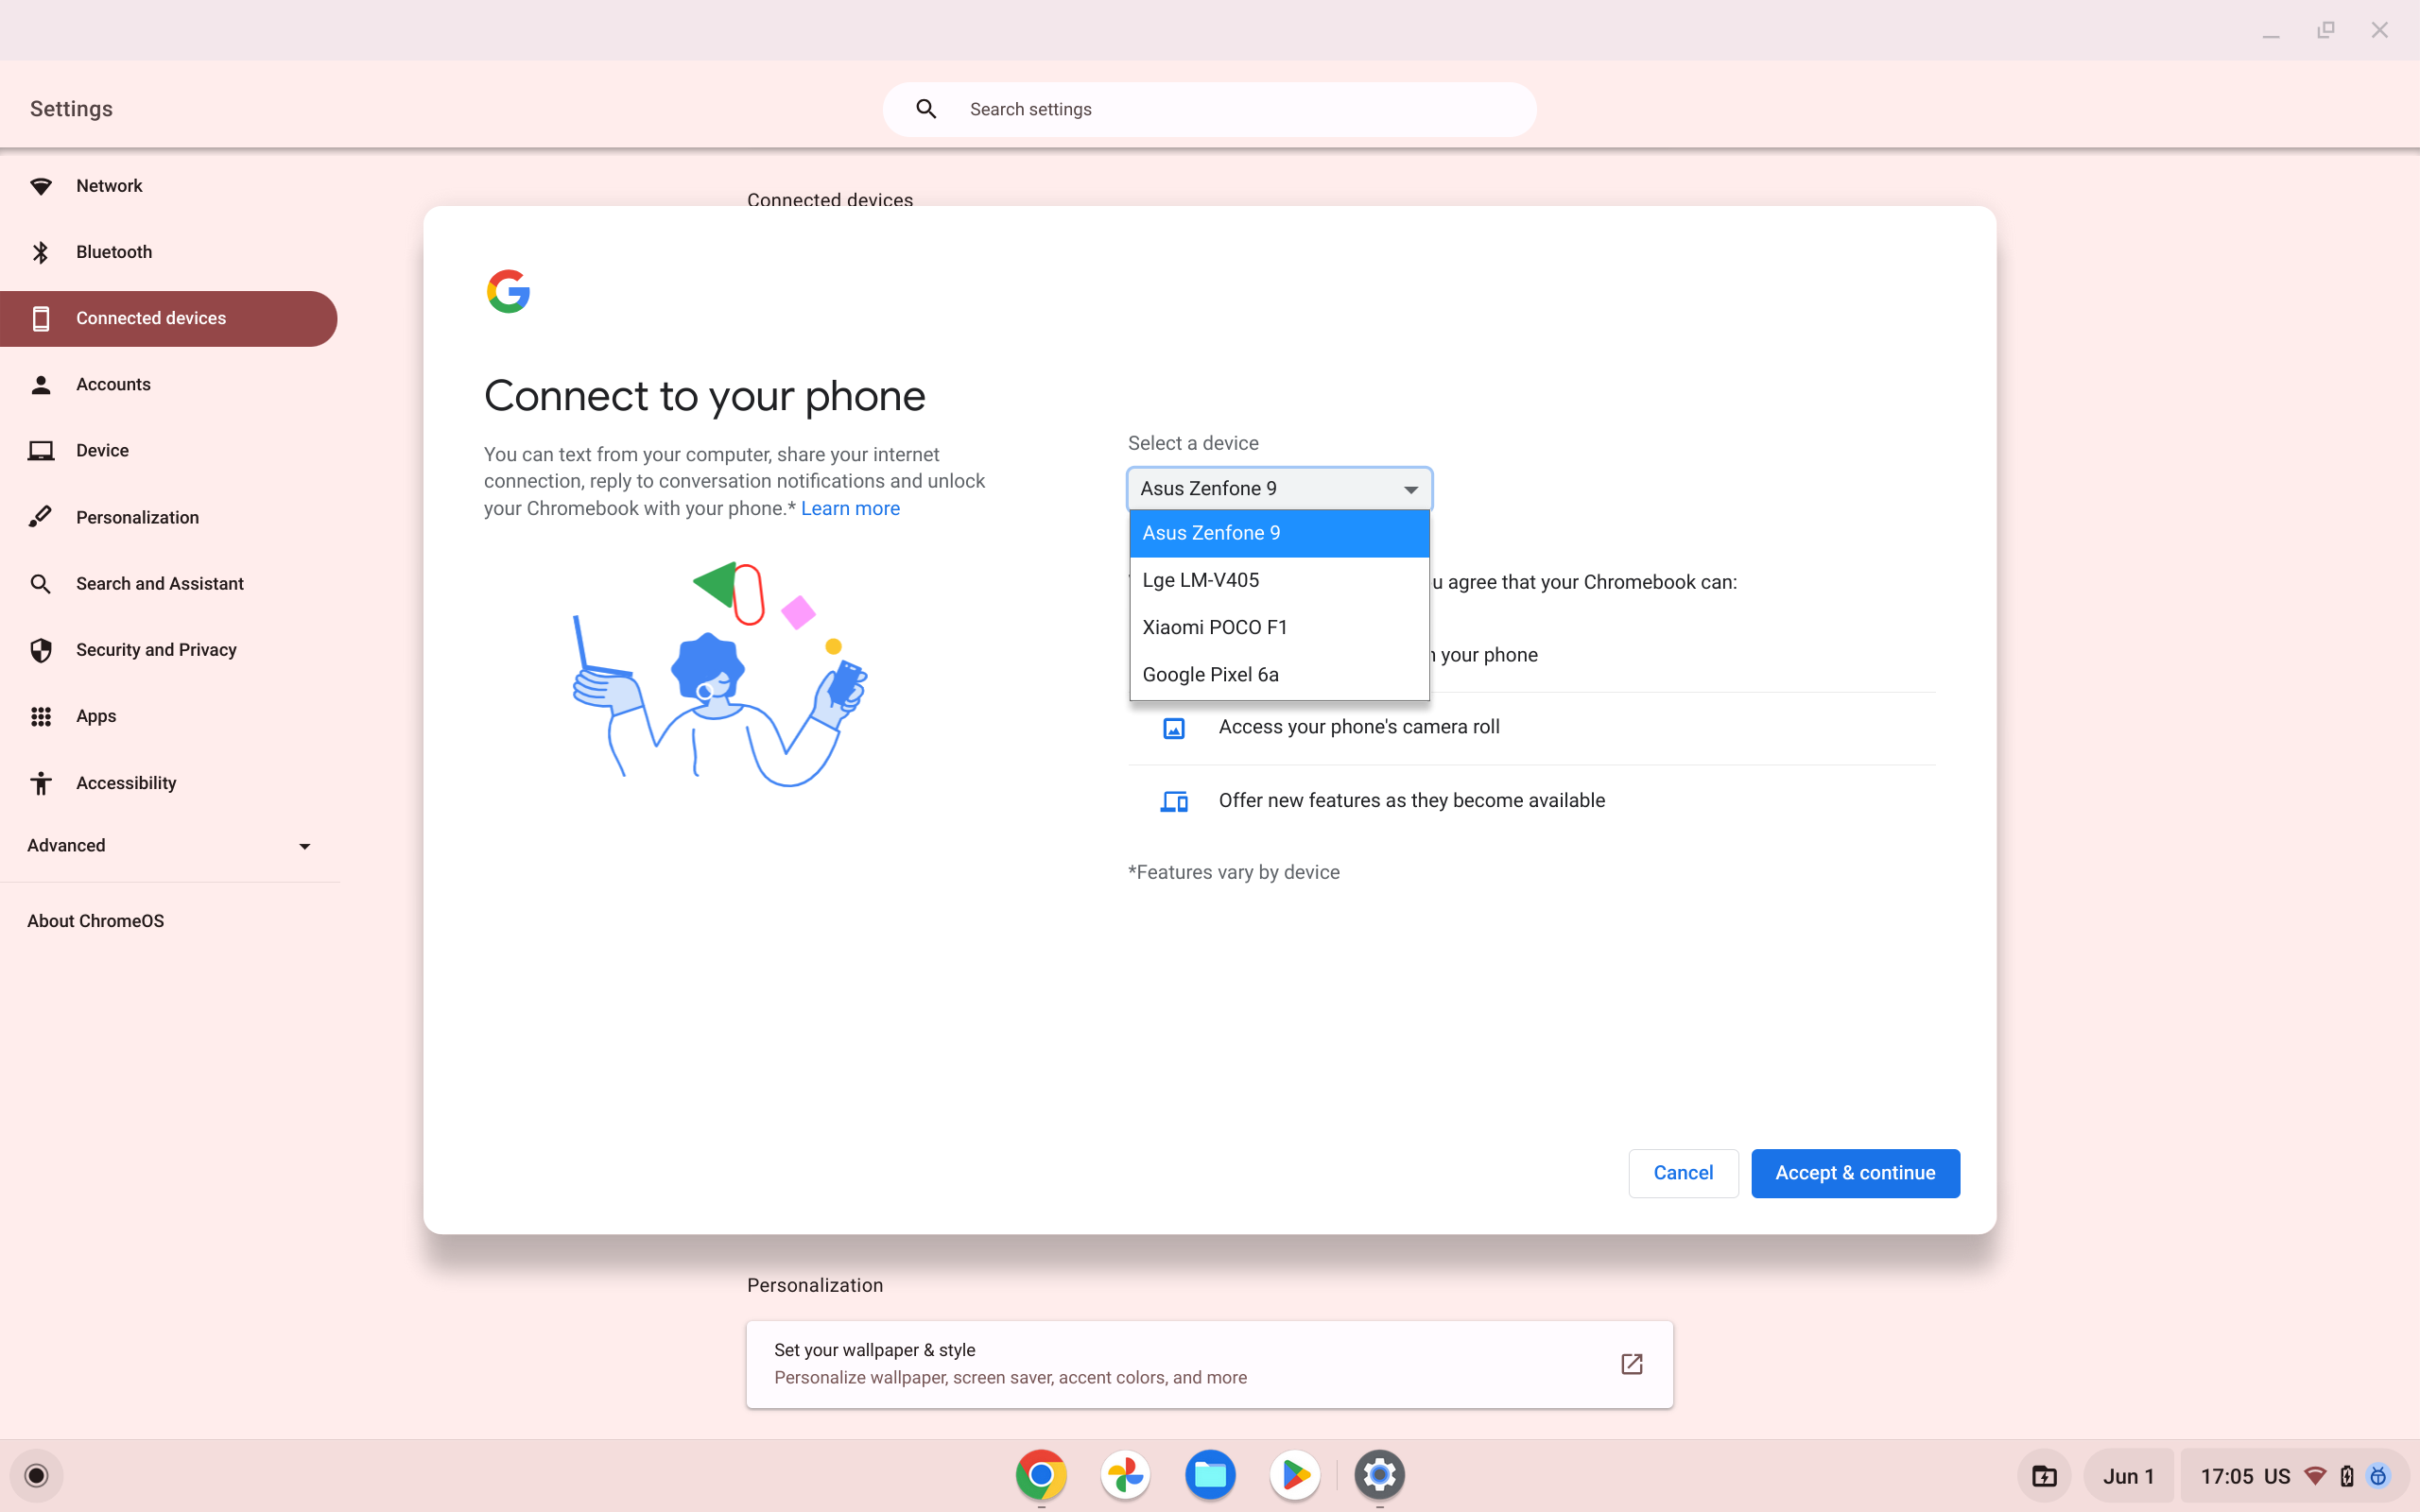 The setup window for Phone Hub on ChromeOS, which asks which Android phone the user would like to connect.